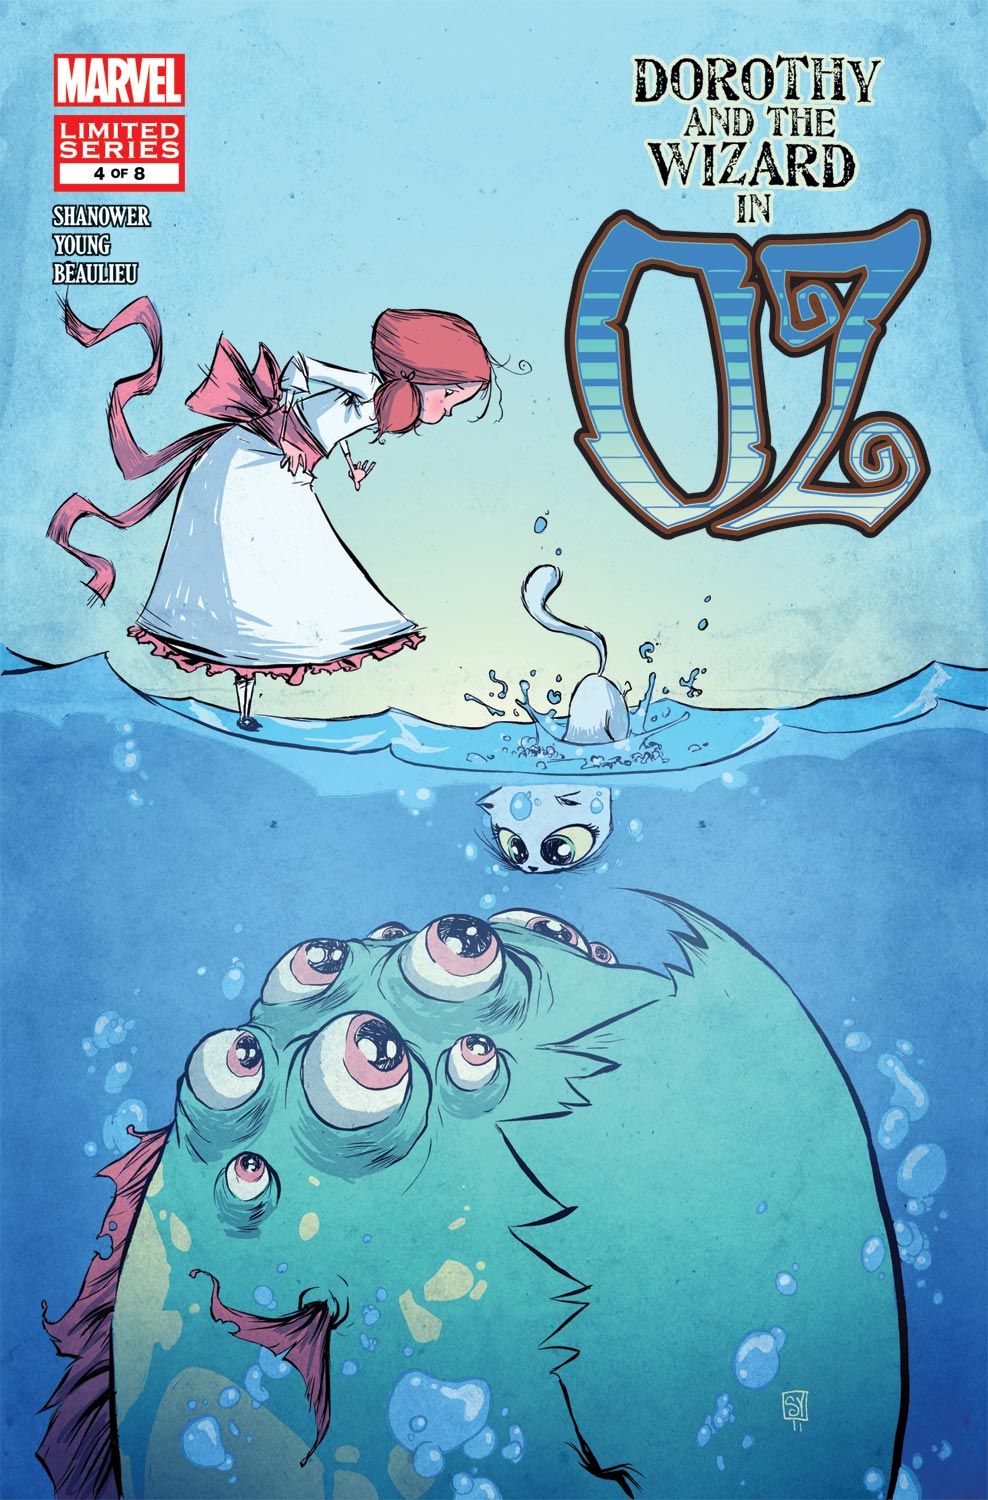 Dorothy & the Wizard in Oz (2011) #4